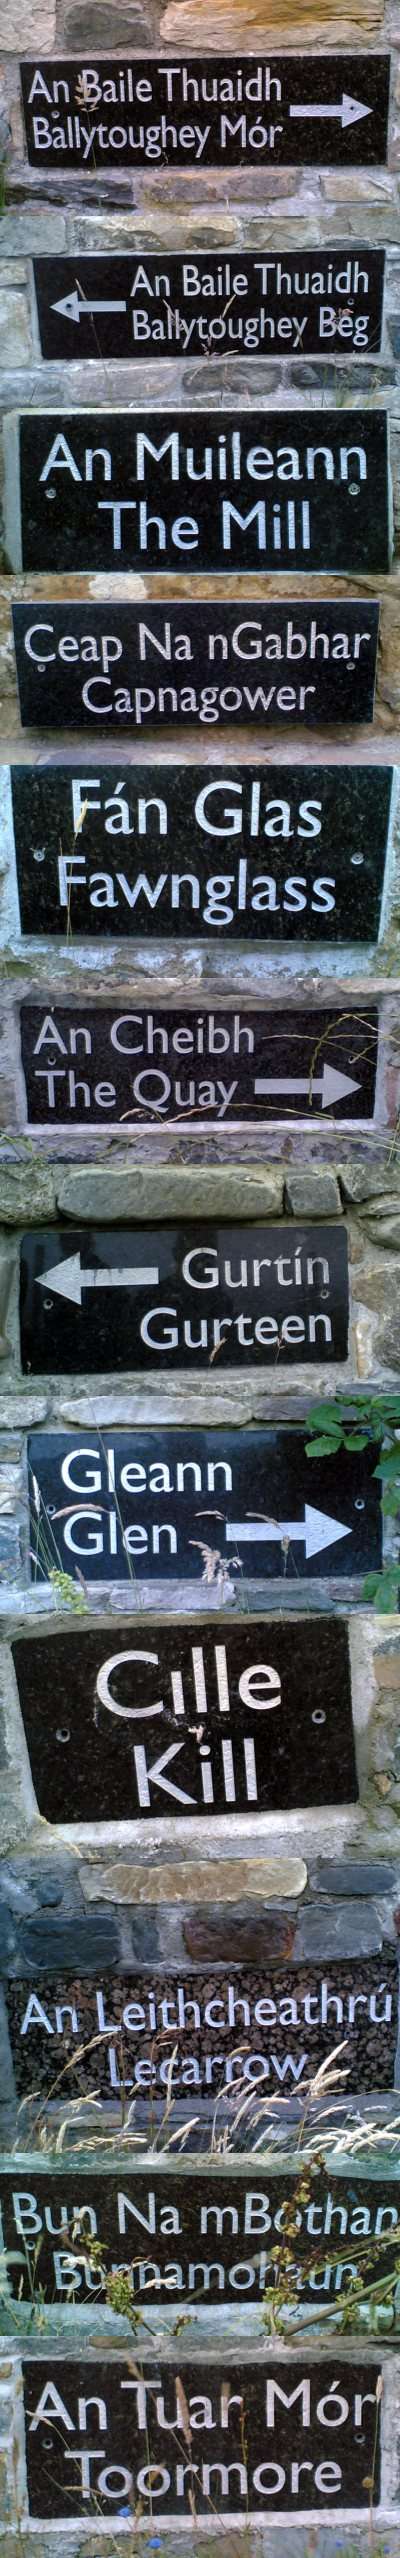 Placename signs on Clare Island - All but Quay, Gurteen and The Mill are townland names as listed in the New Survey of Clare Island - Volume 1. Missing are signs for the townlands of Maum and Strake.